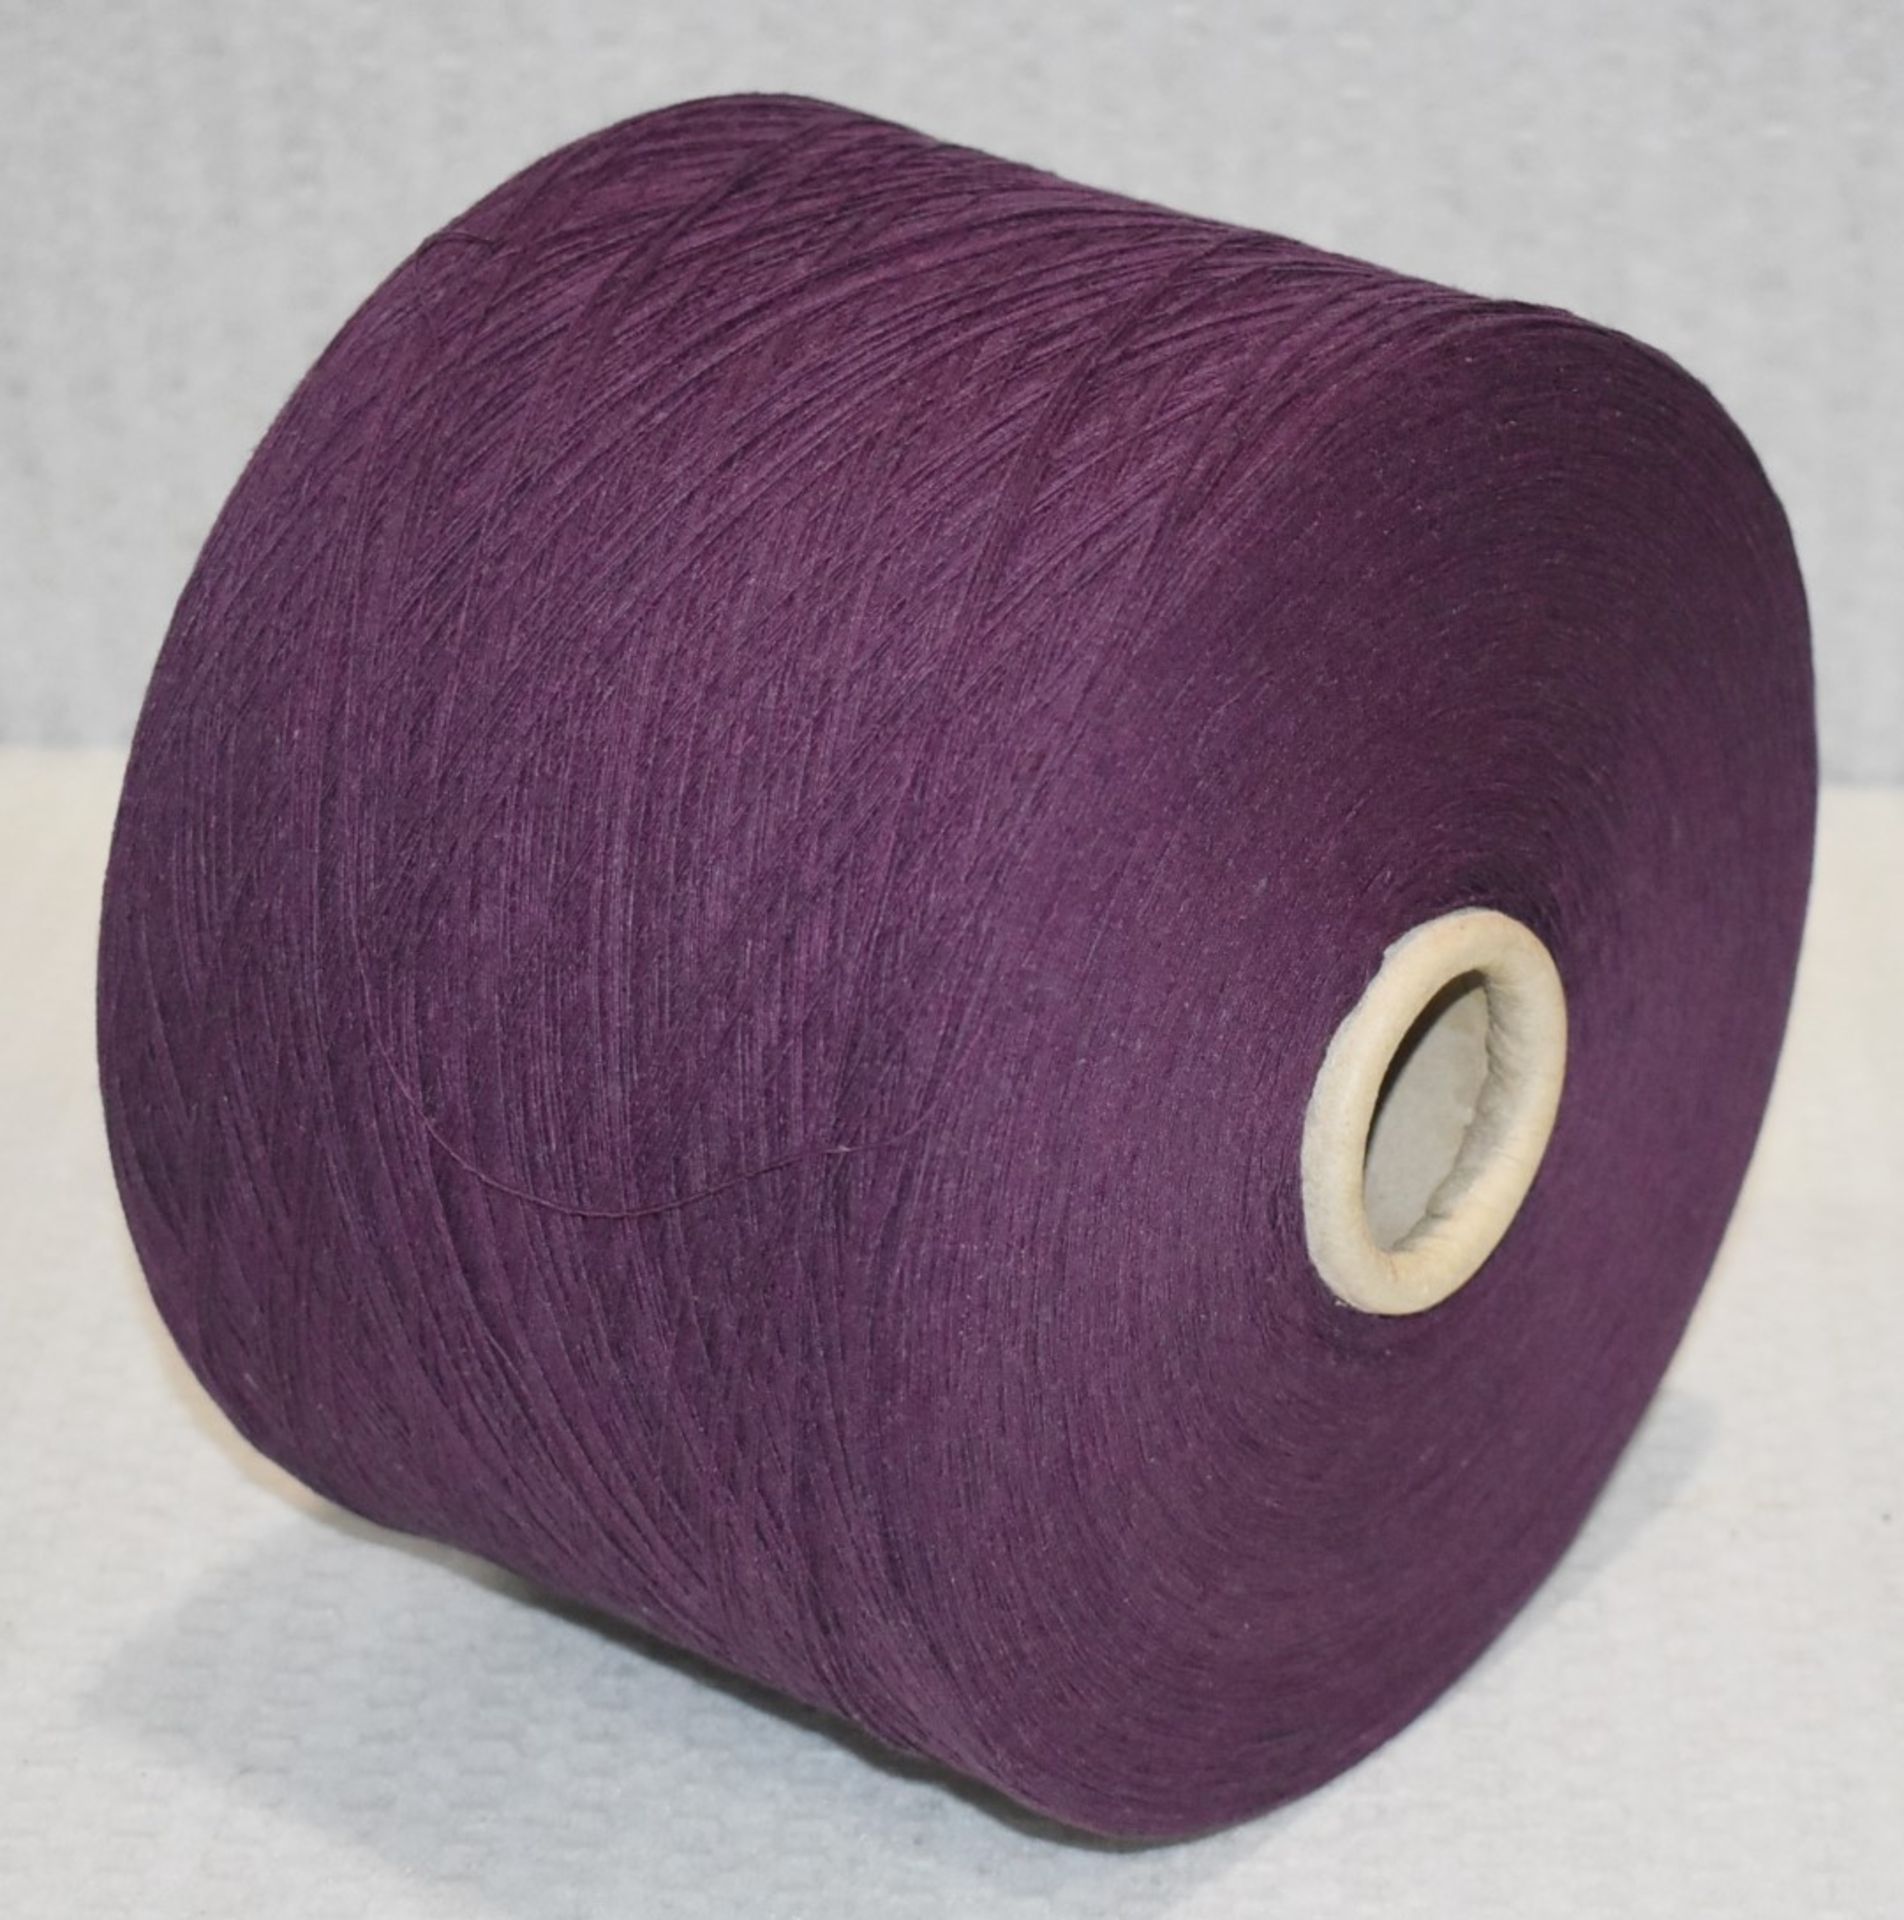 12 x Cones of 1/13 MicroCotton Knitting Yarn - Purple - Approx Weight: 2,300g - New Stock ABL Yarn - Image 5 of 9